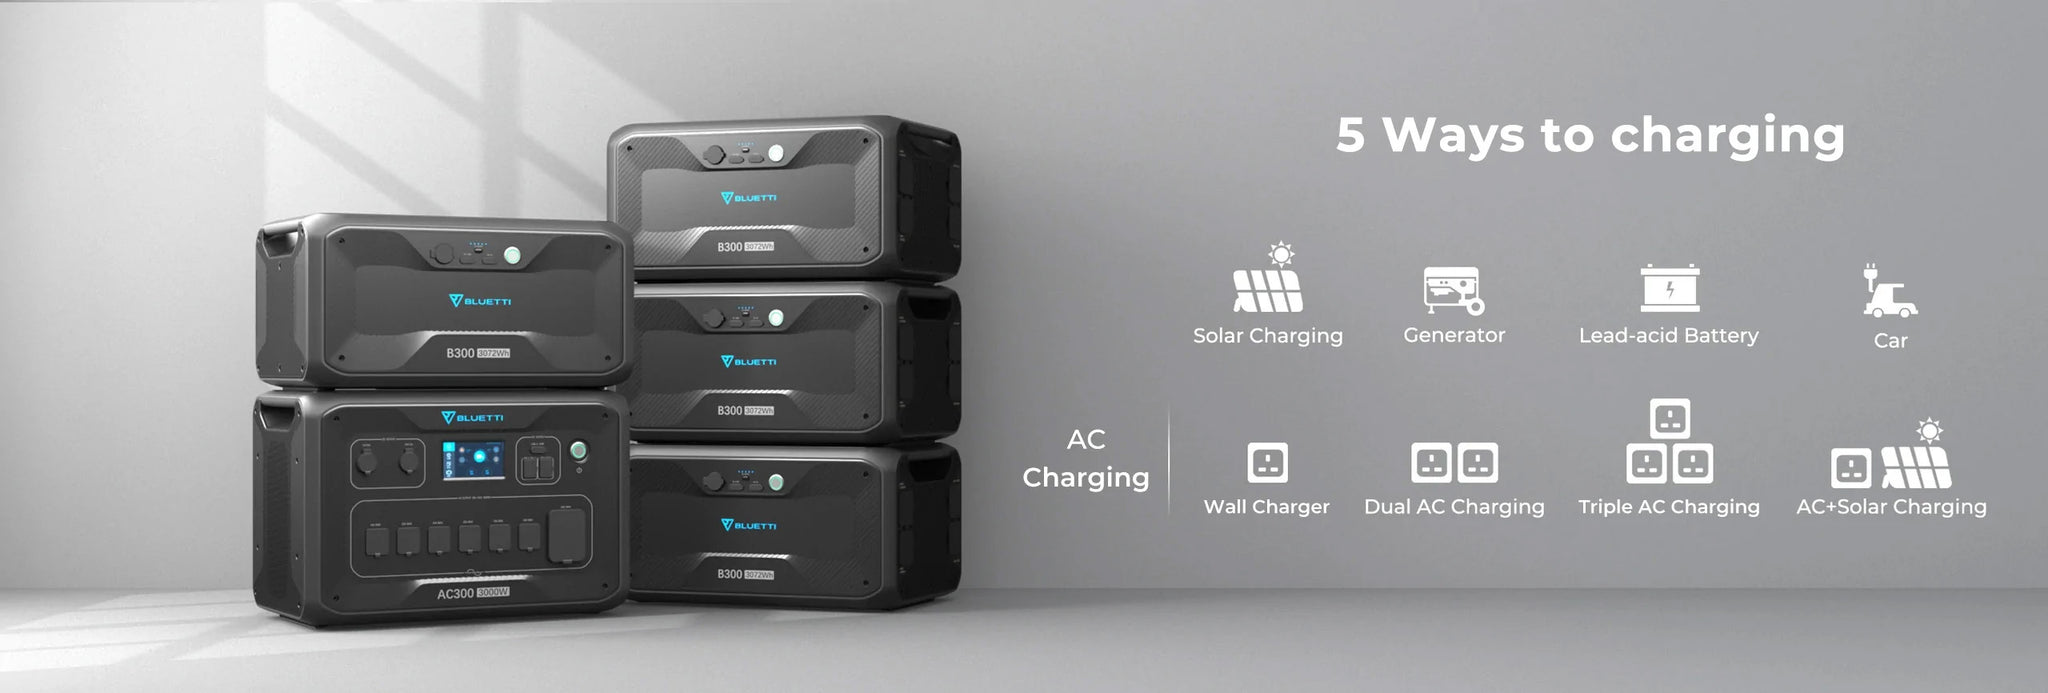 The Bluetti AC300 Can Be Charged By Solar, Generator, Lead-Acid Battery, Car, Wall Charger, Dual AC Charging, Triple AC-Charging, and AC+ Solar Charging.